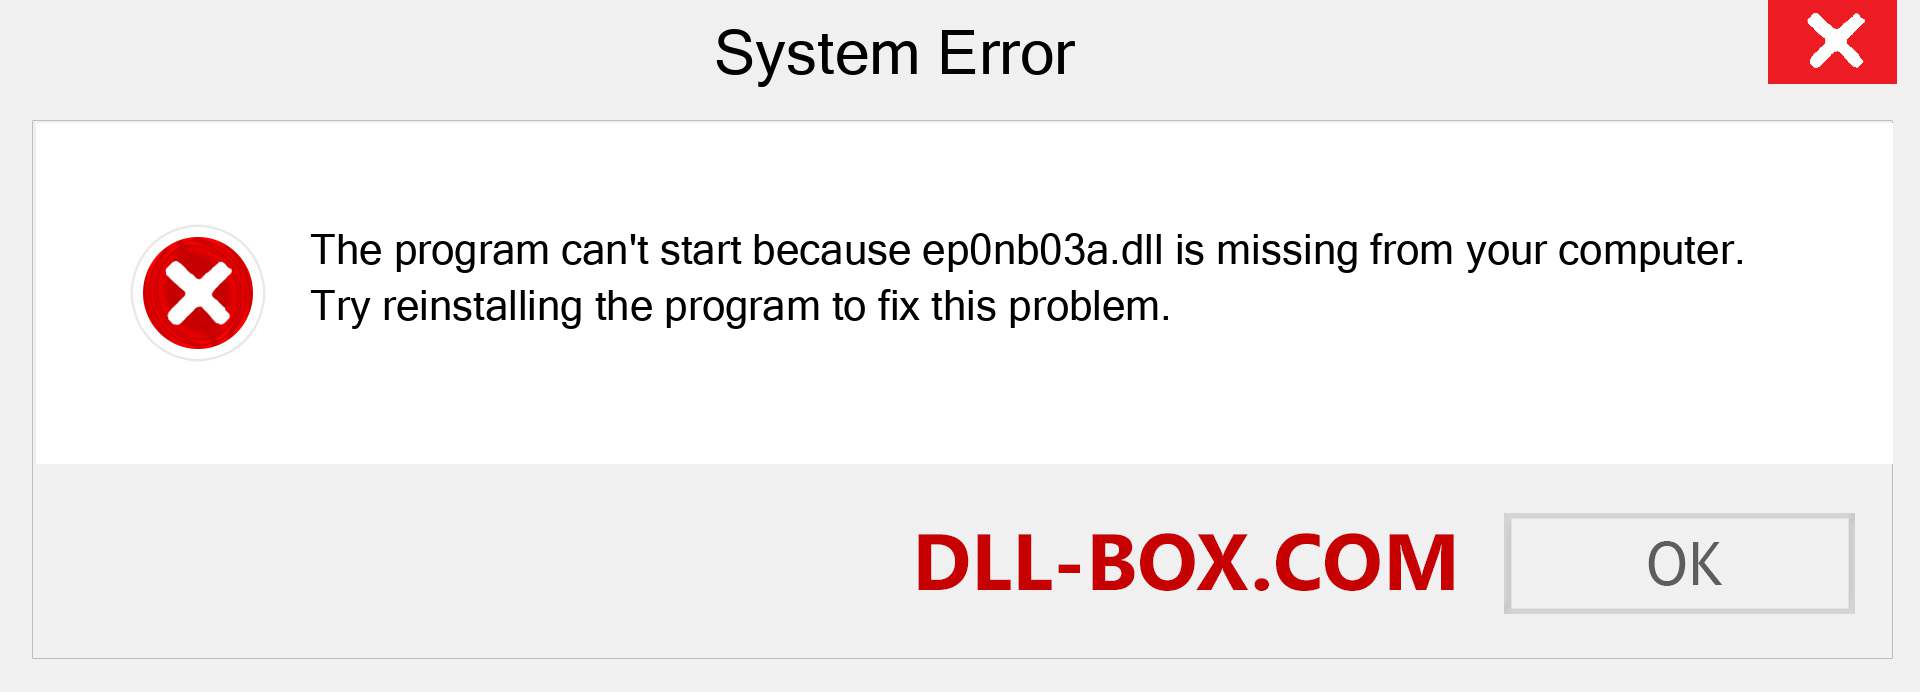  ep0nb03a.dll file is missing?. Download for Windows 7, 8, 10 - Fix  ep0nb03a dll Missing Error on Windows, photos, images